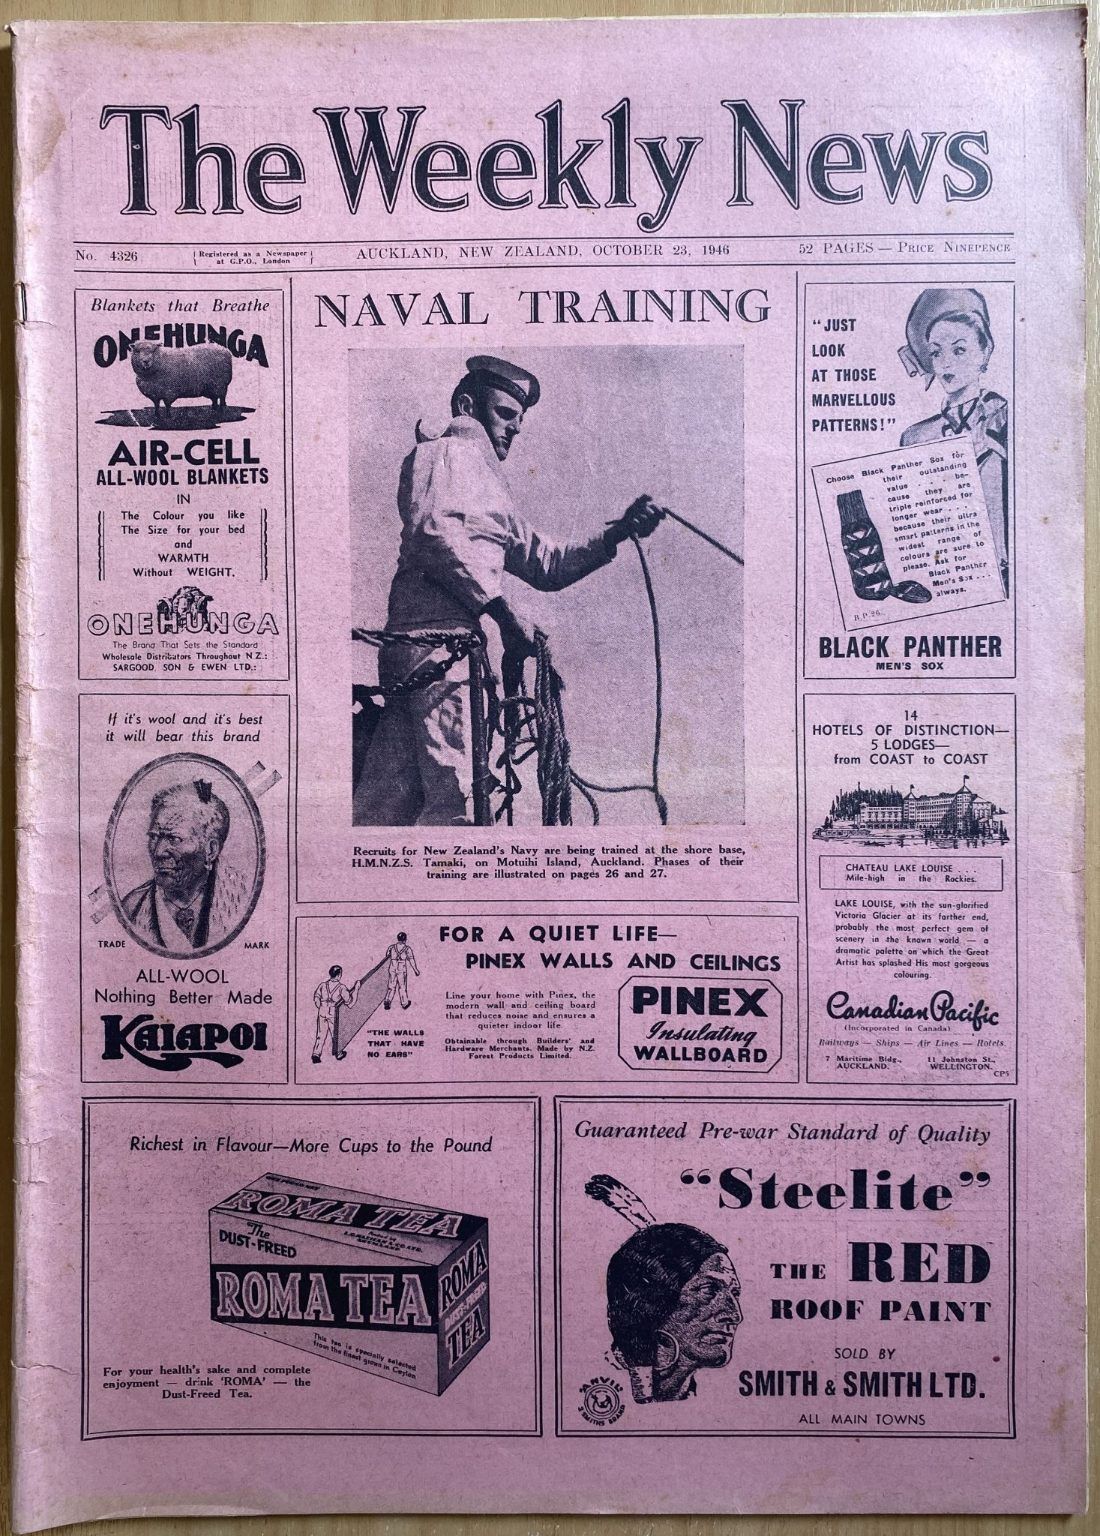 OLD NEWSPAPER: The Weekly News - No. 4326, 23 October 1946